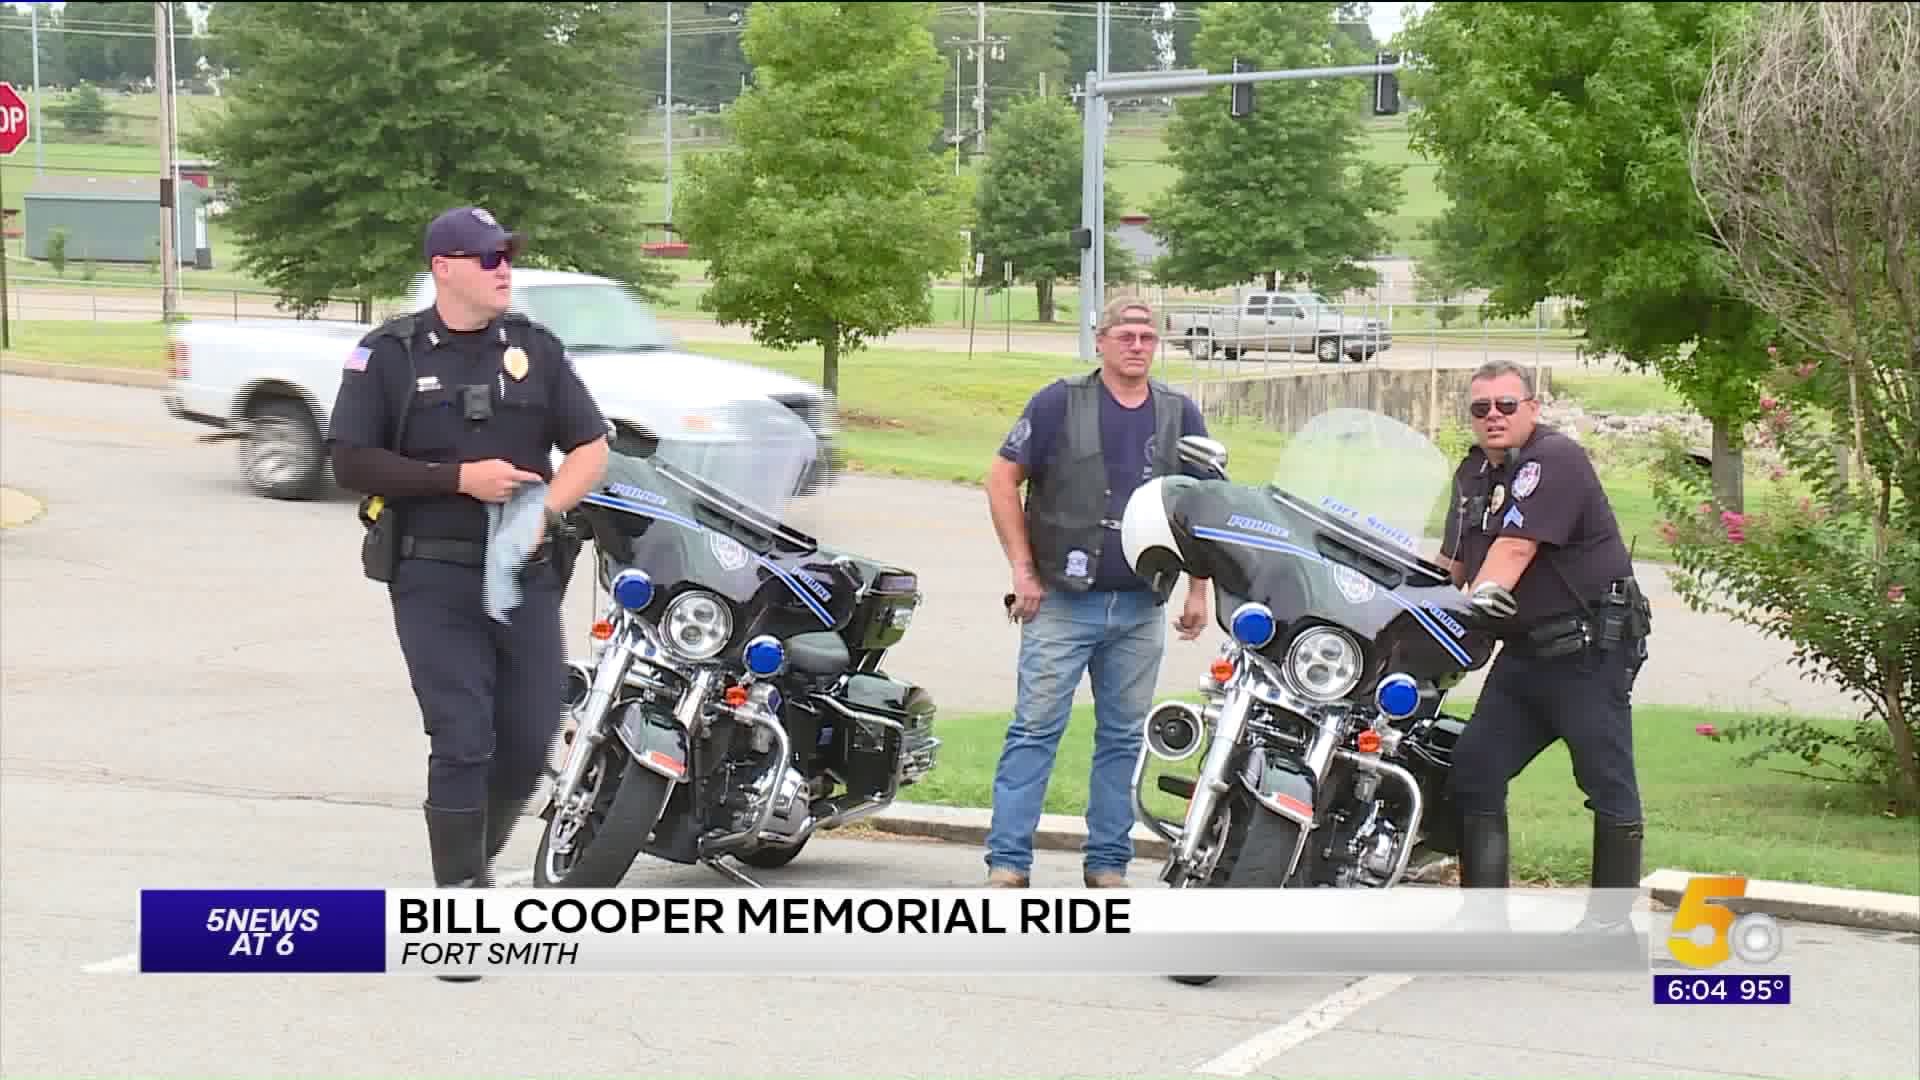 Memorial Ride Held For Deputy Bill Cooper Three Years After His Tragic Death In The Line Of Duty